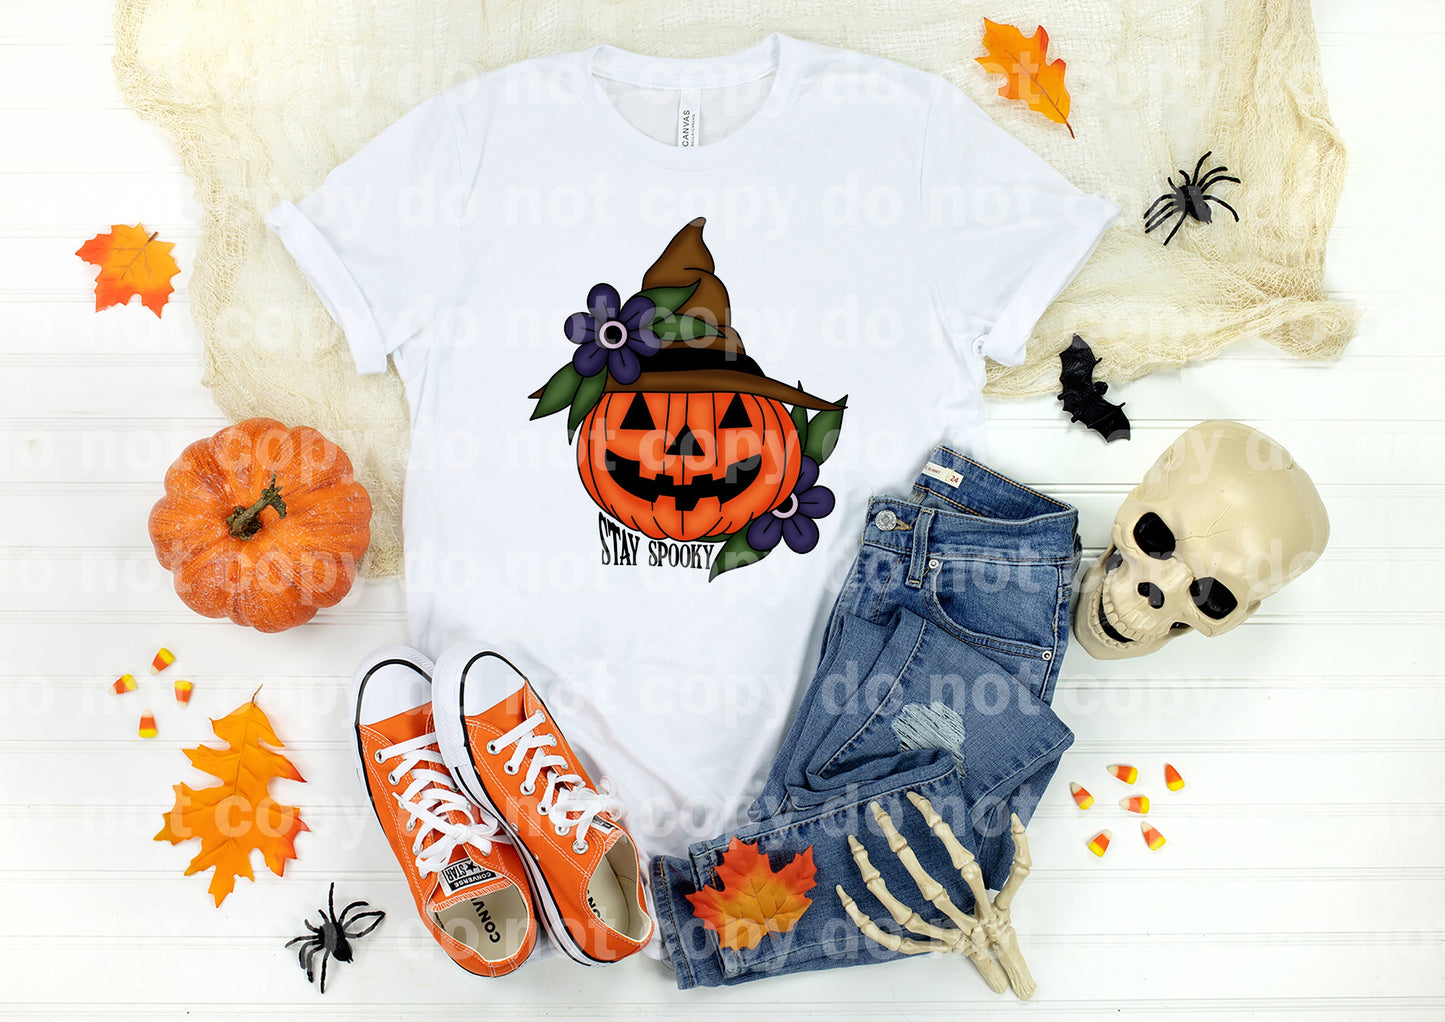 Pumpkin Hat Stay Spooky with Pocket Option Dream Print or Sublimation Print